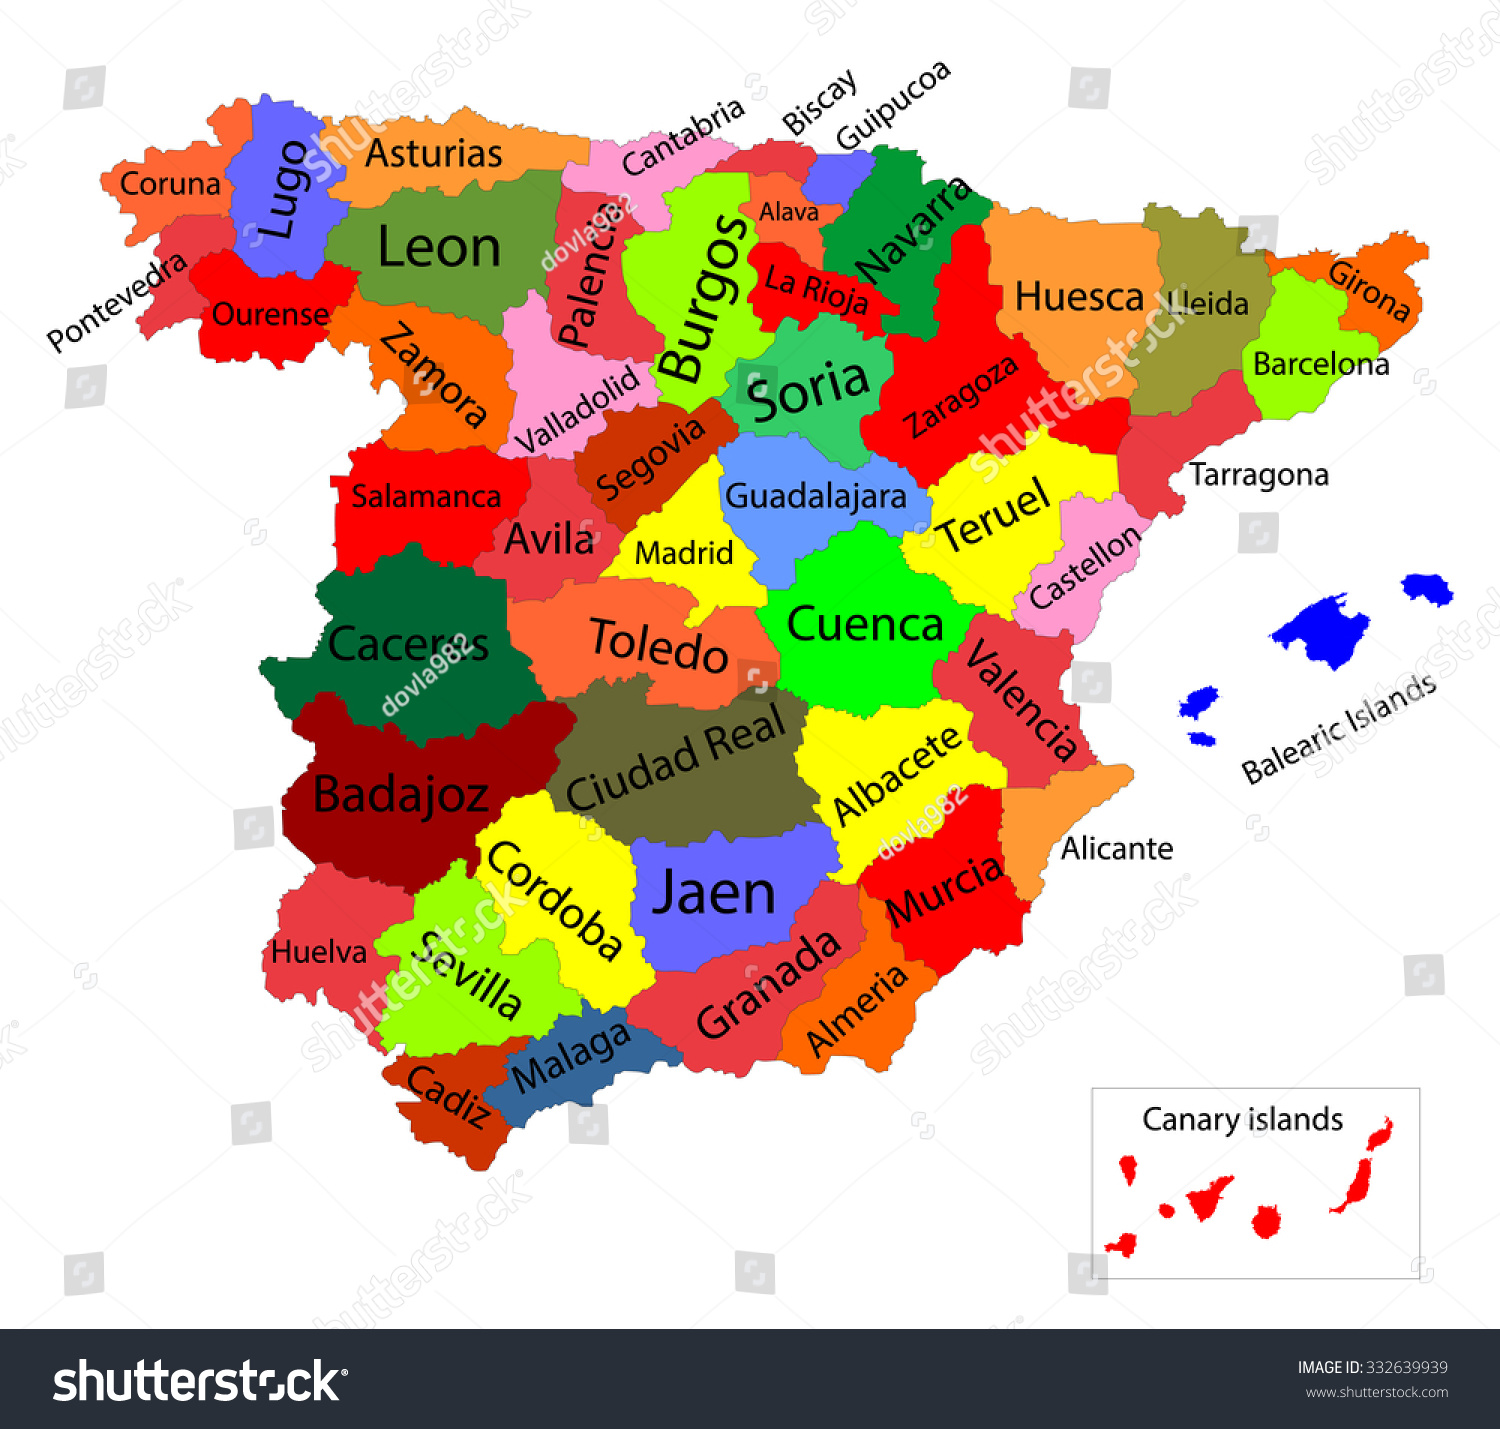 clipart map of spain - photo #16